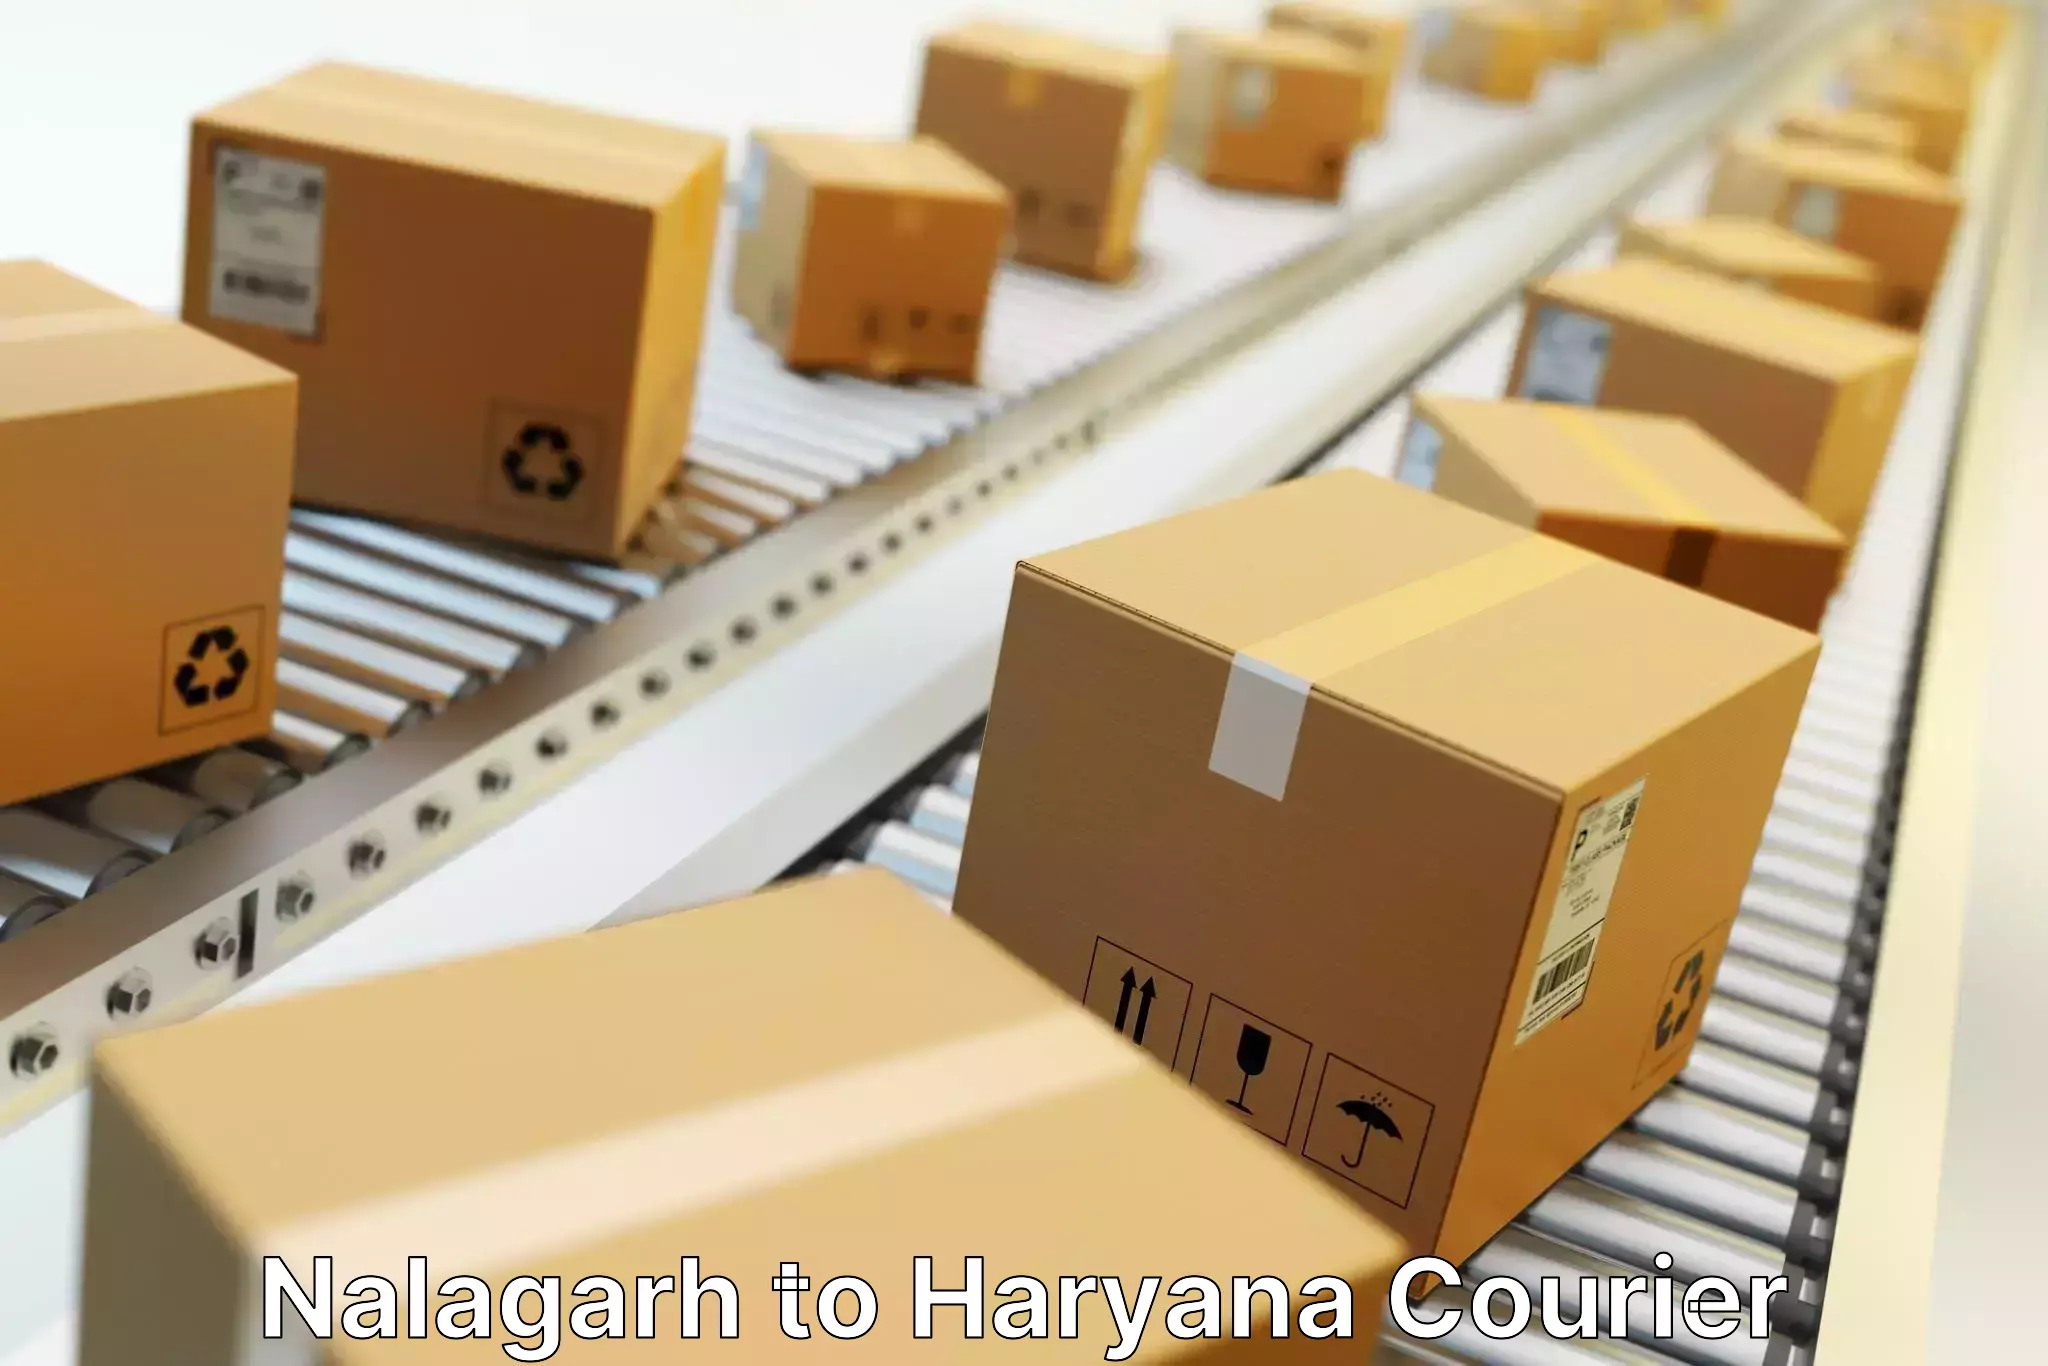 High-quality delivery services in Nalagarh to Sonipat